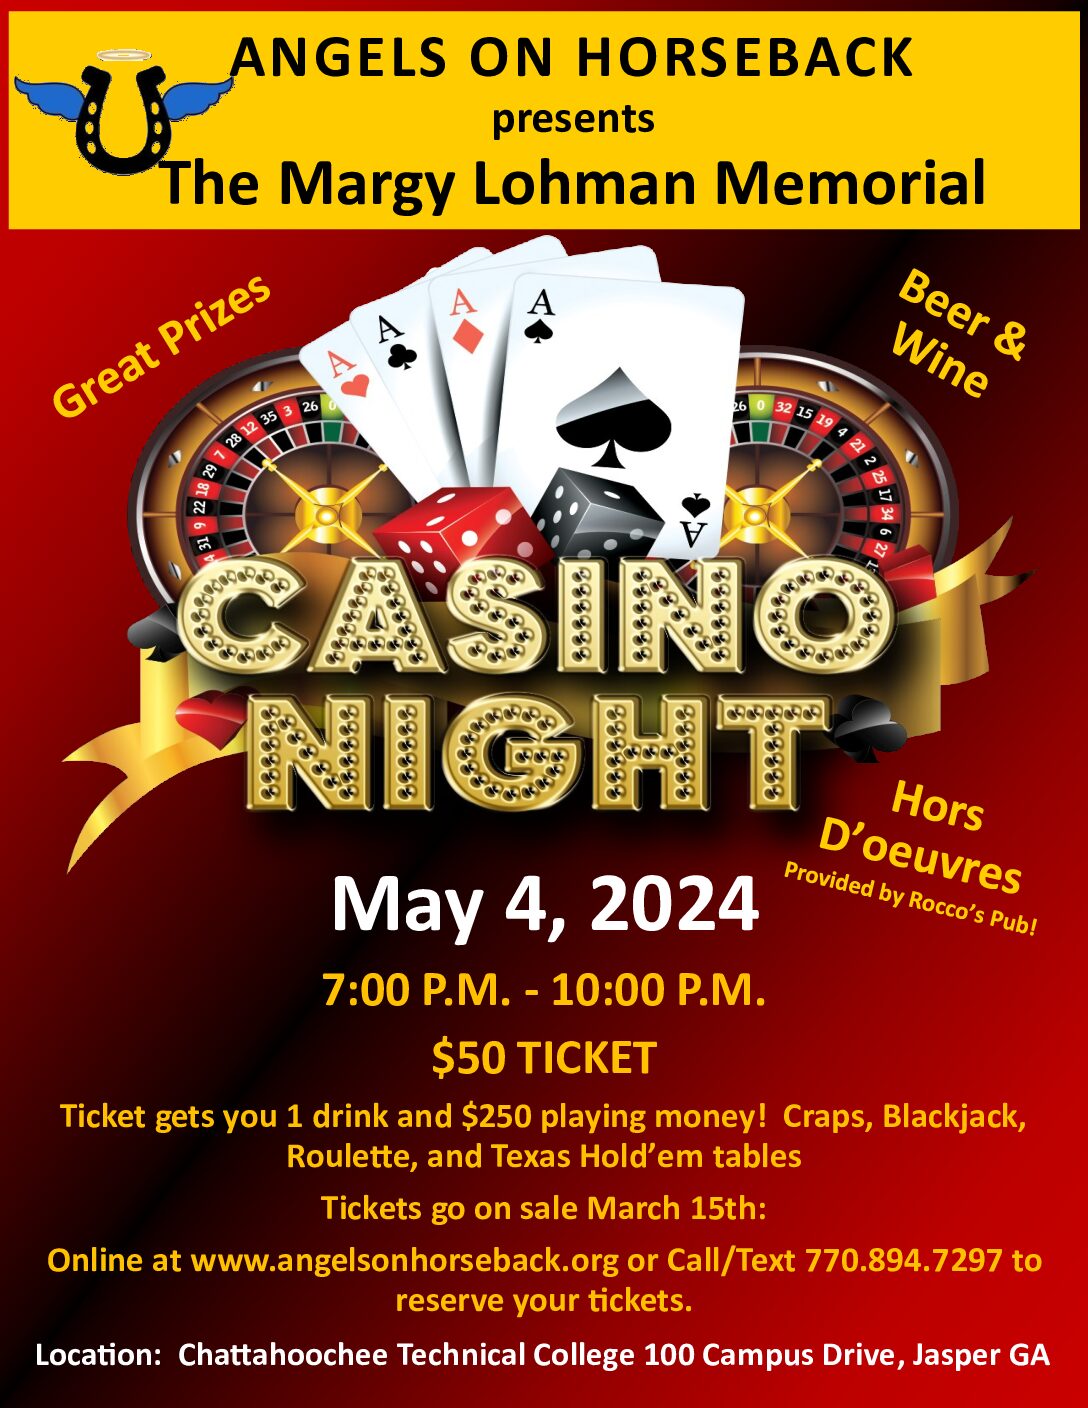 The Margy Lohman Memorial Casino Night! Get your tickets or become a Sponsor HERE!